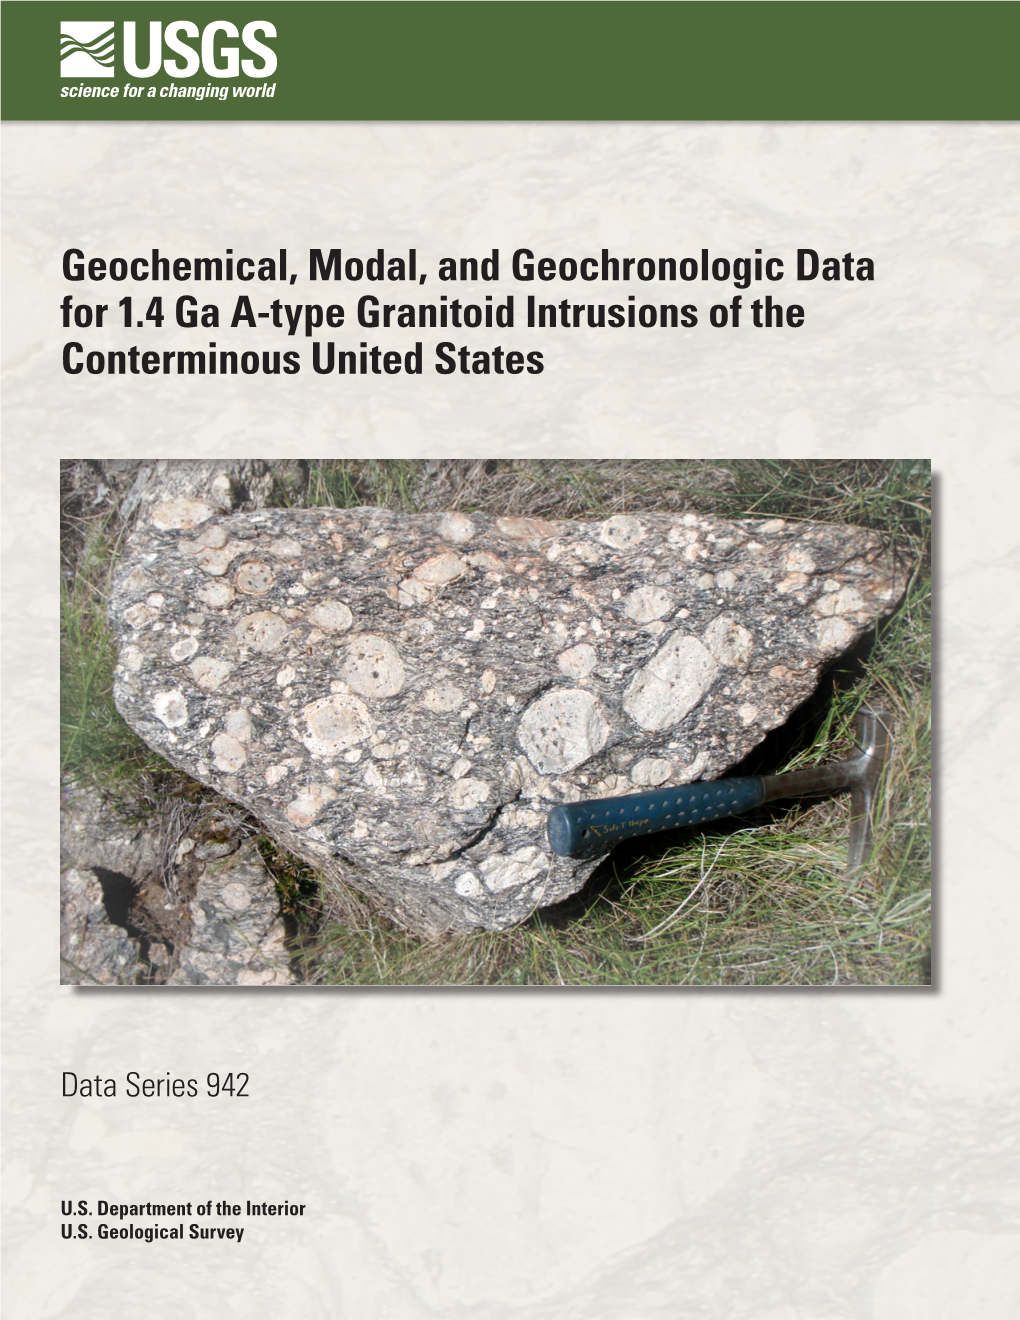 Geochemical, Modal, and Geochronologic Data for 1.4 Ga A-Type Granitoid Intrusions of the Conterminous United States